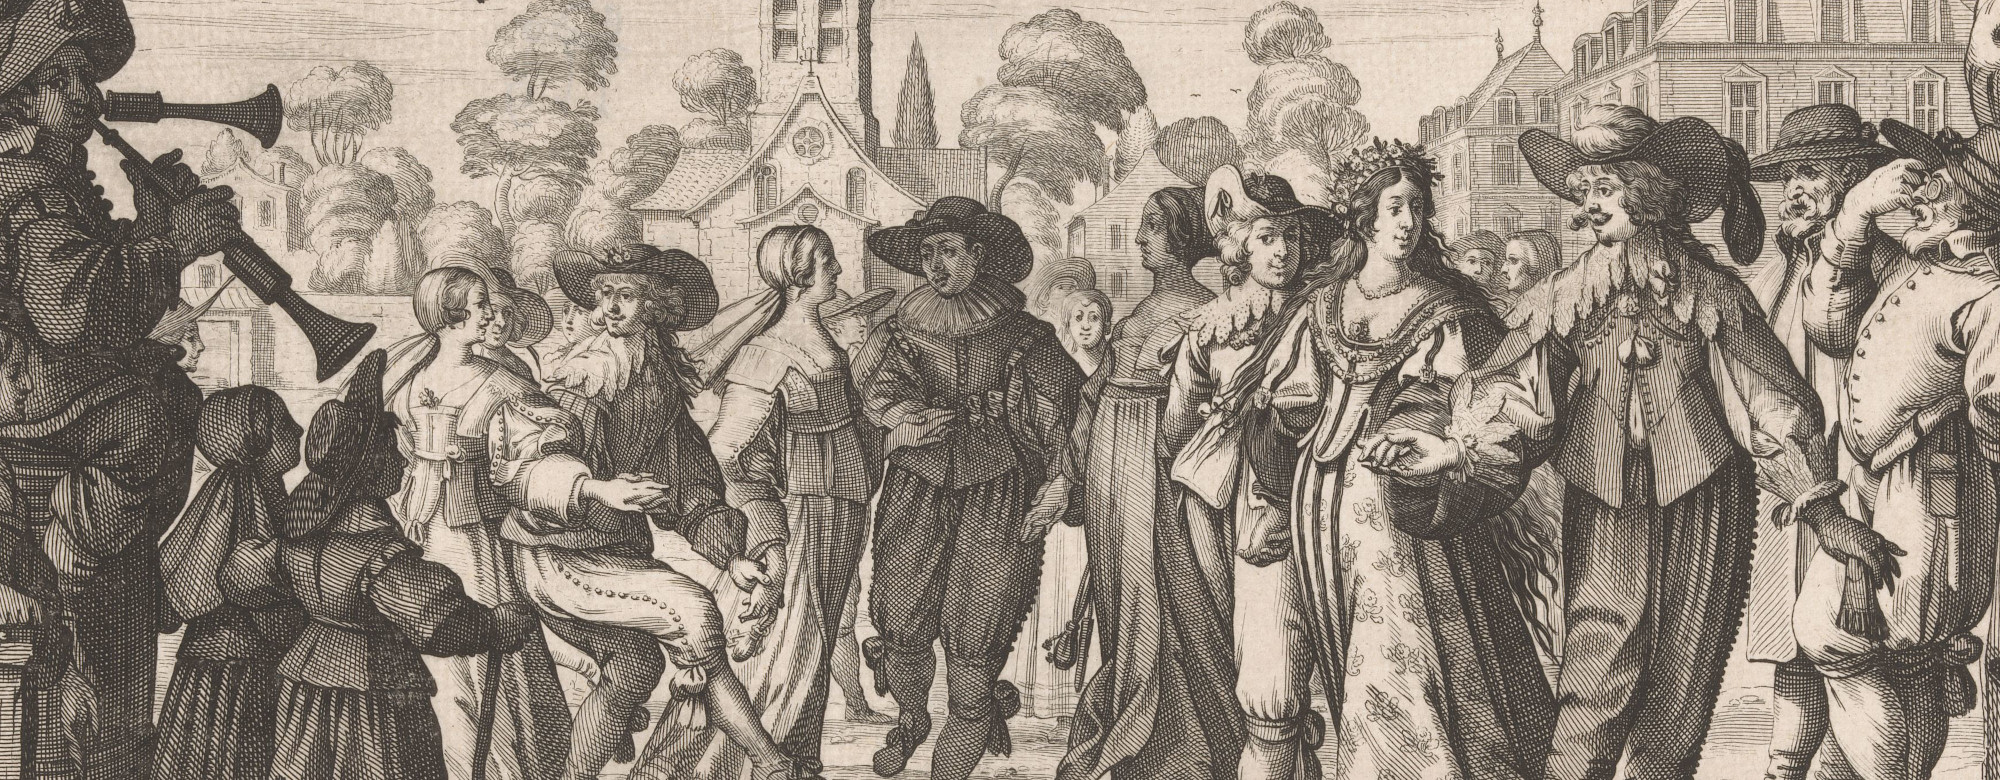 Cropped etching of a wedding scene: Front left two musicians playing the shawm. A bridal couple and several young couples in contemporary and old-fashioned clothing dance to the music. On the right, a man stands against a tree, viewing the scene through his pince-nez. A church tower in the background.